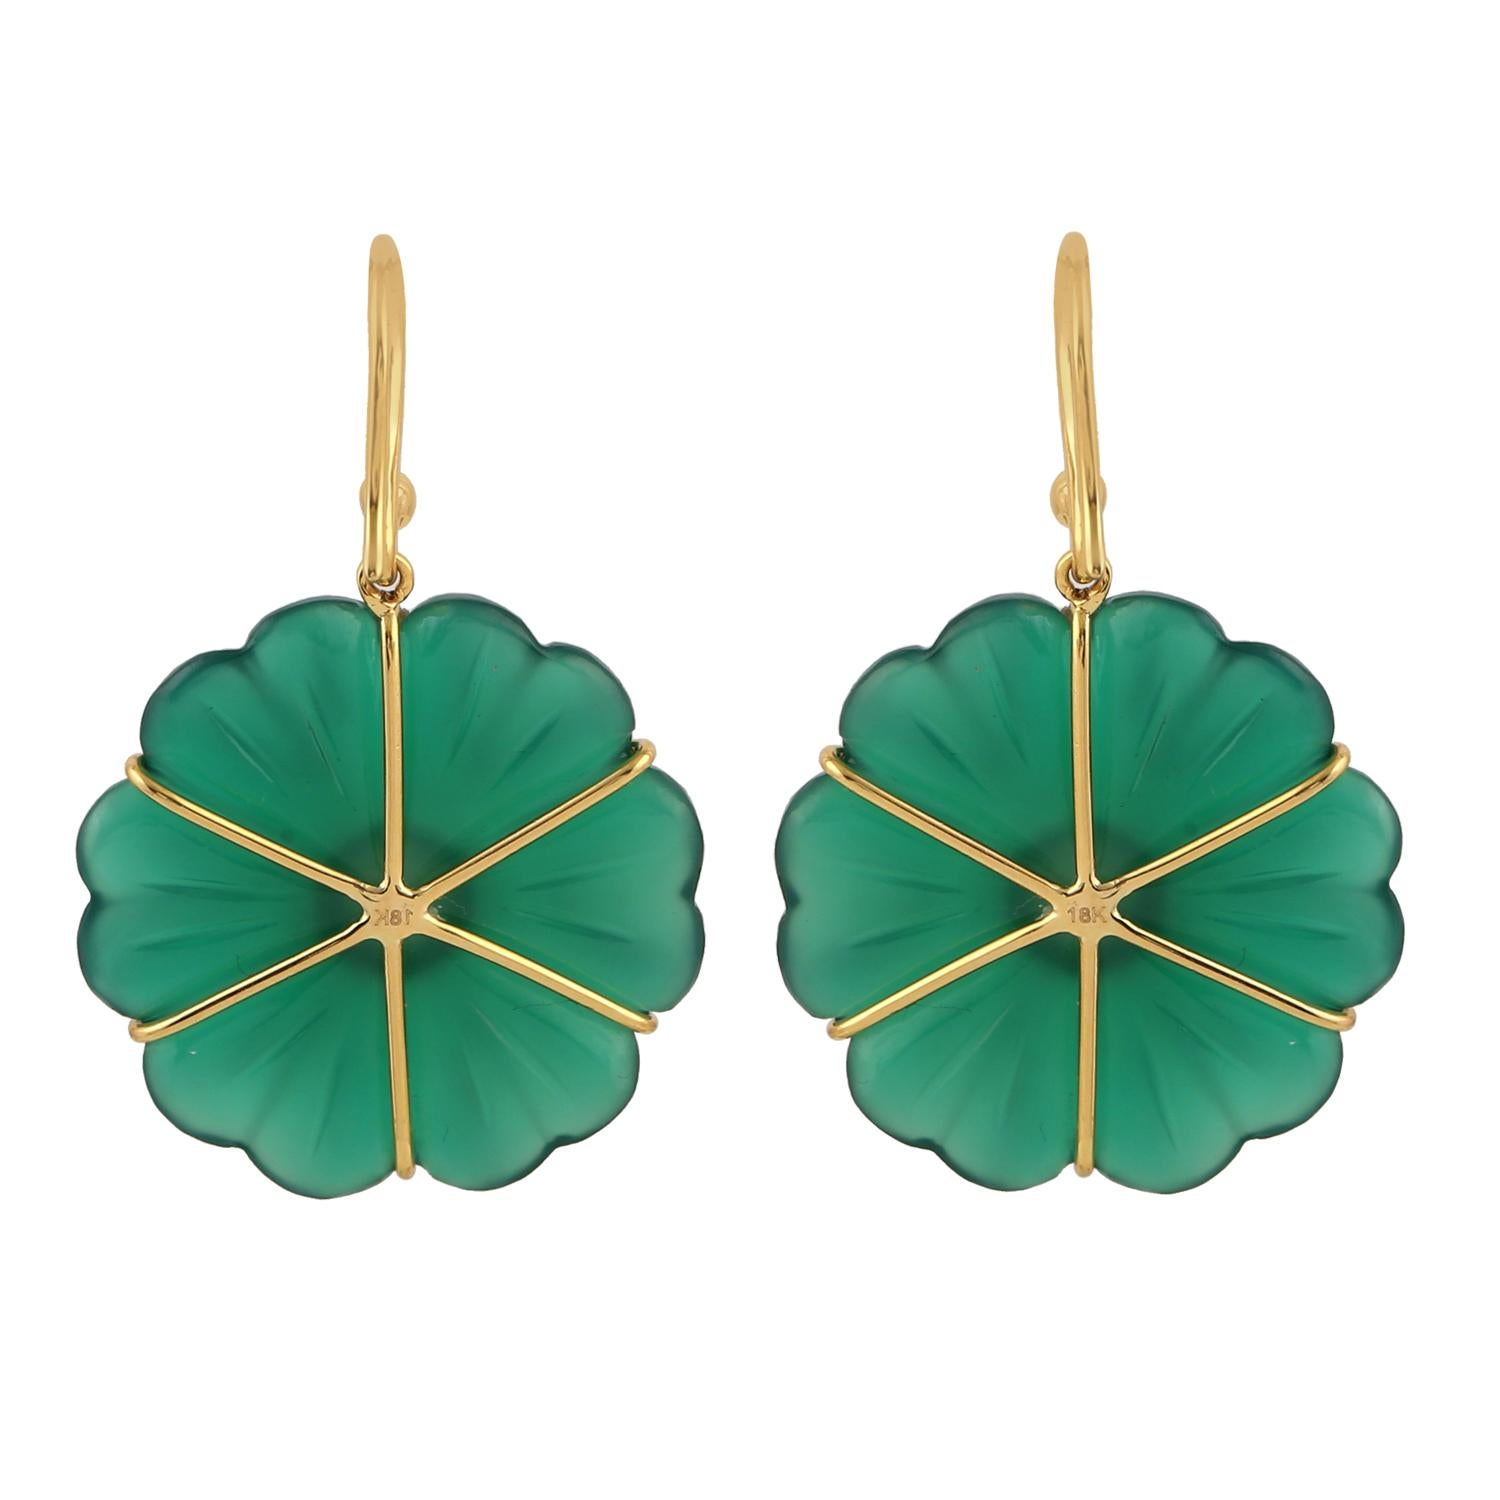 Cast in 18-karat gold. These beautiful earrings are set with 32.61 carats of carved green onyx, 1.32 carats Ethiopian opal and .05 carats of sparkling diamonds.  See other flower collection pieces.

FOLLOW  MEGHNA JEWELS storefront to view the